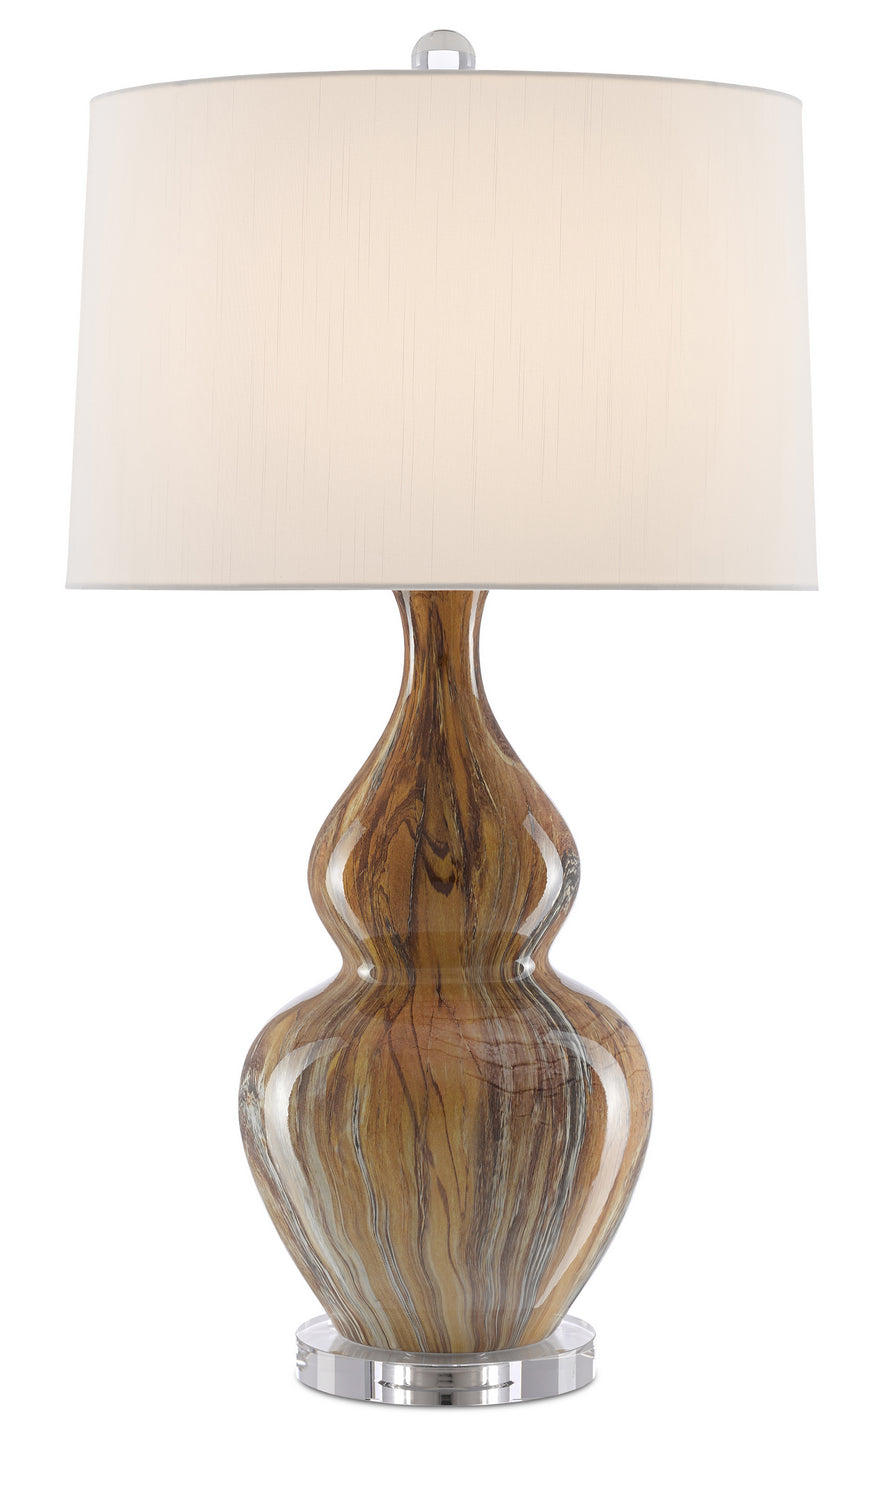 One Light Table Lamp from the Kolor collection in Earth/Brown finish